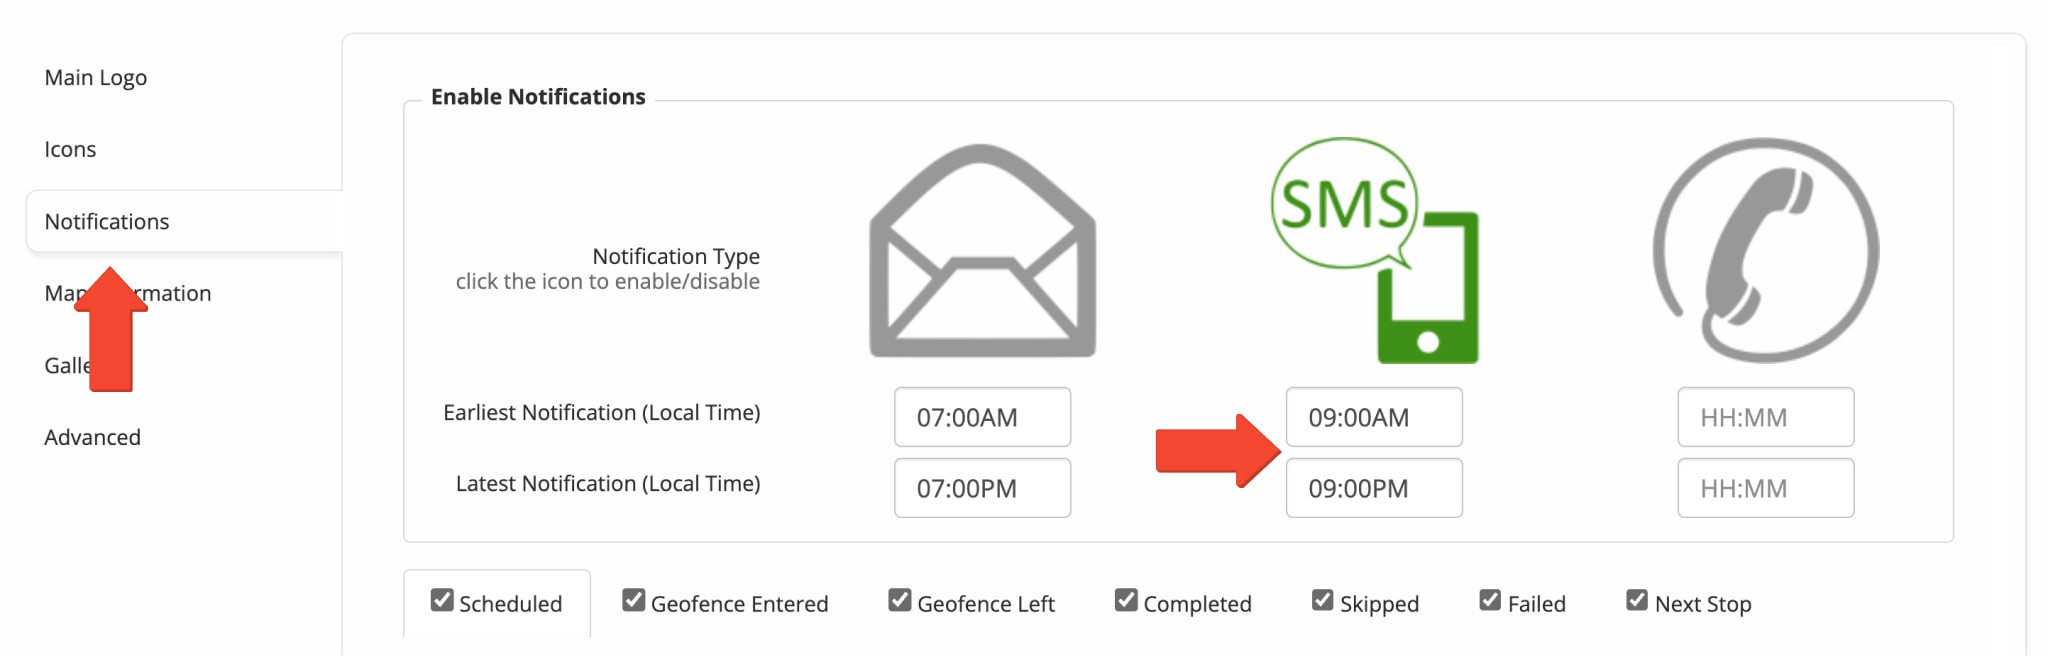 Make sure that the Earliest SMS Notification and the Latest SMS Notification values are not empty.